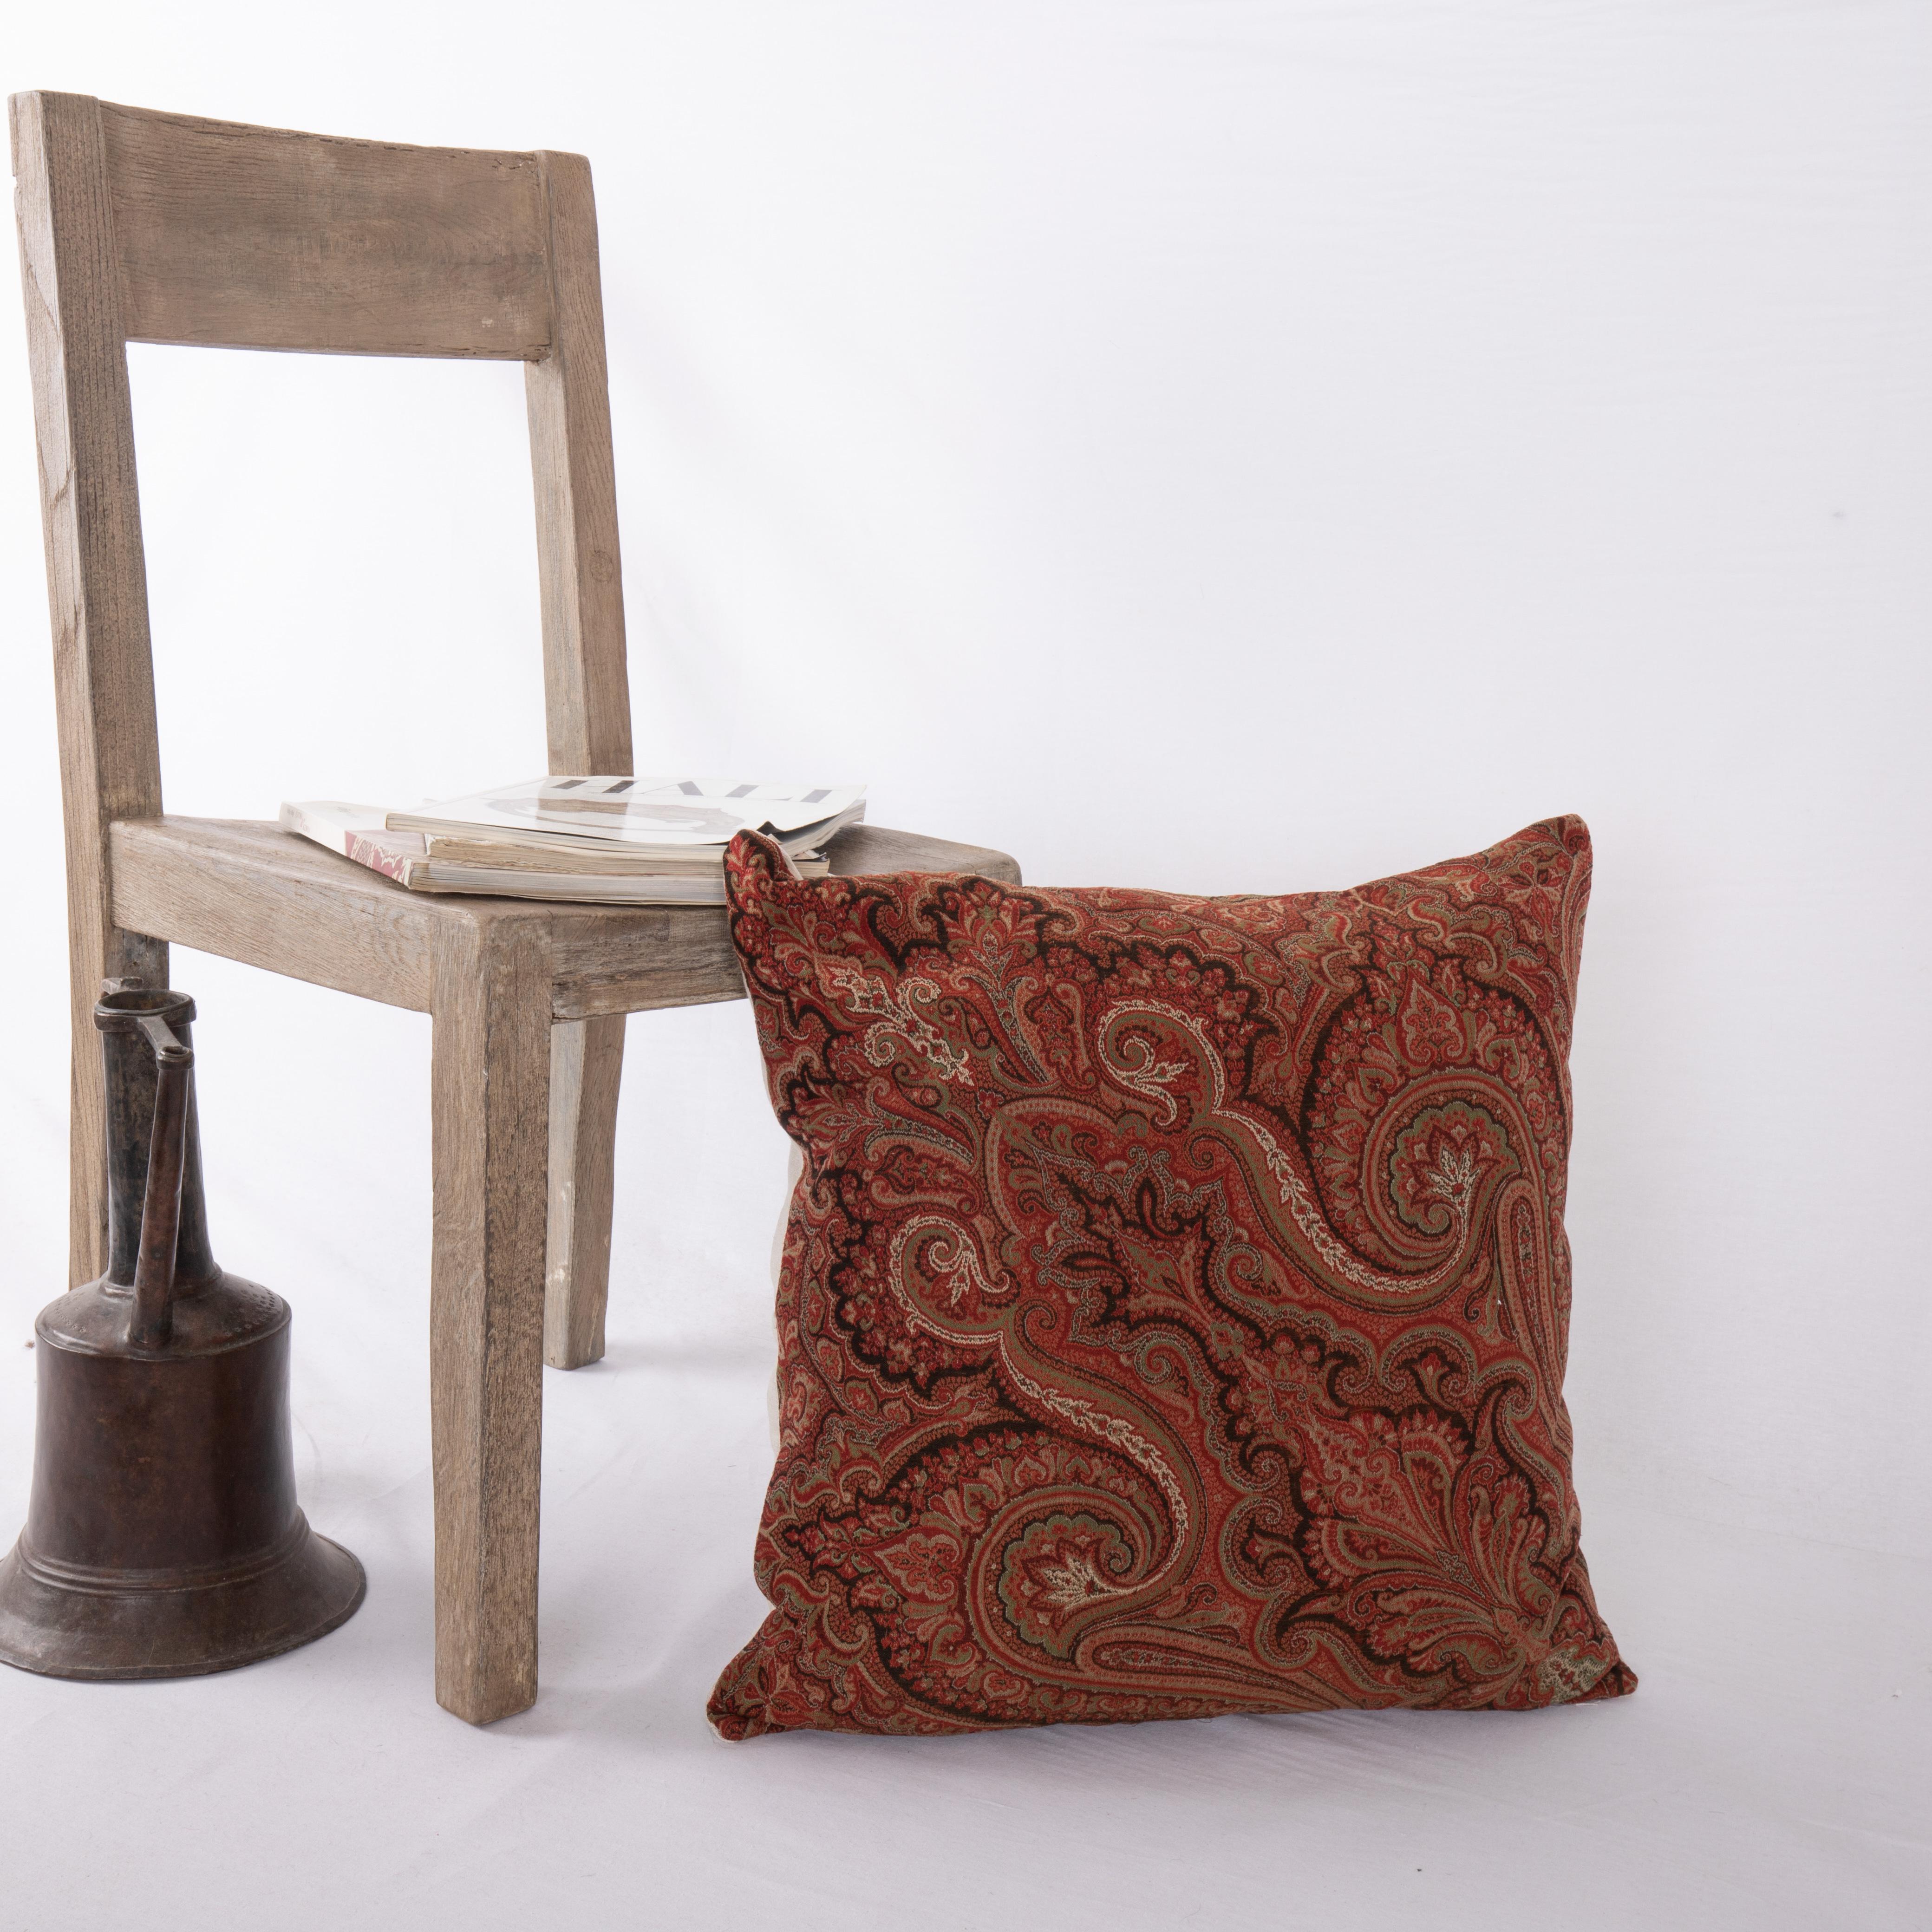 20th Century Antique Pillow Cover Made from a European Wool Paisley Shawl, L 19th/ E.20th For Sale